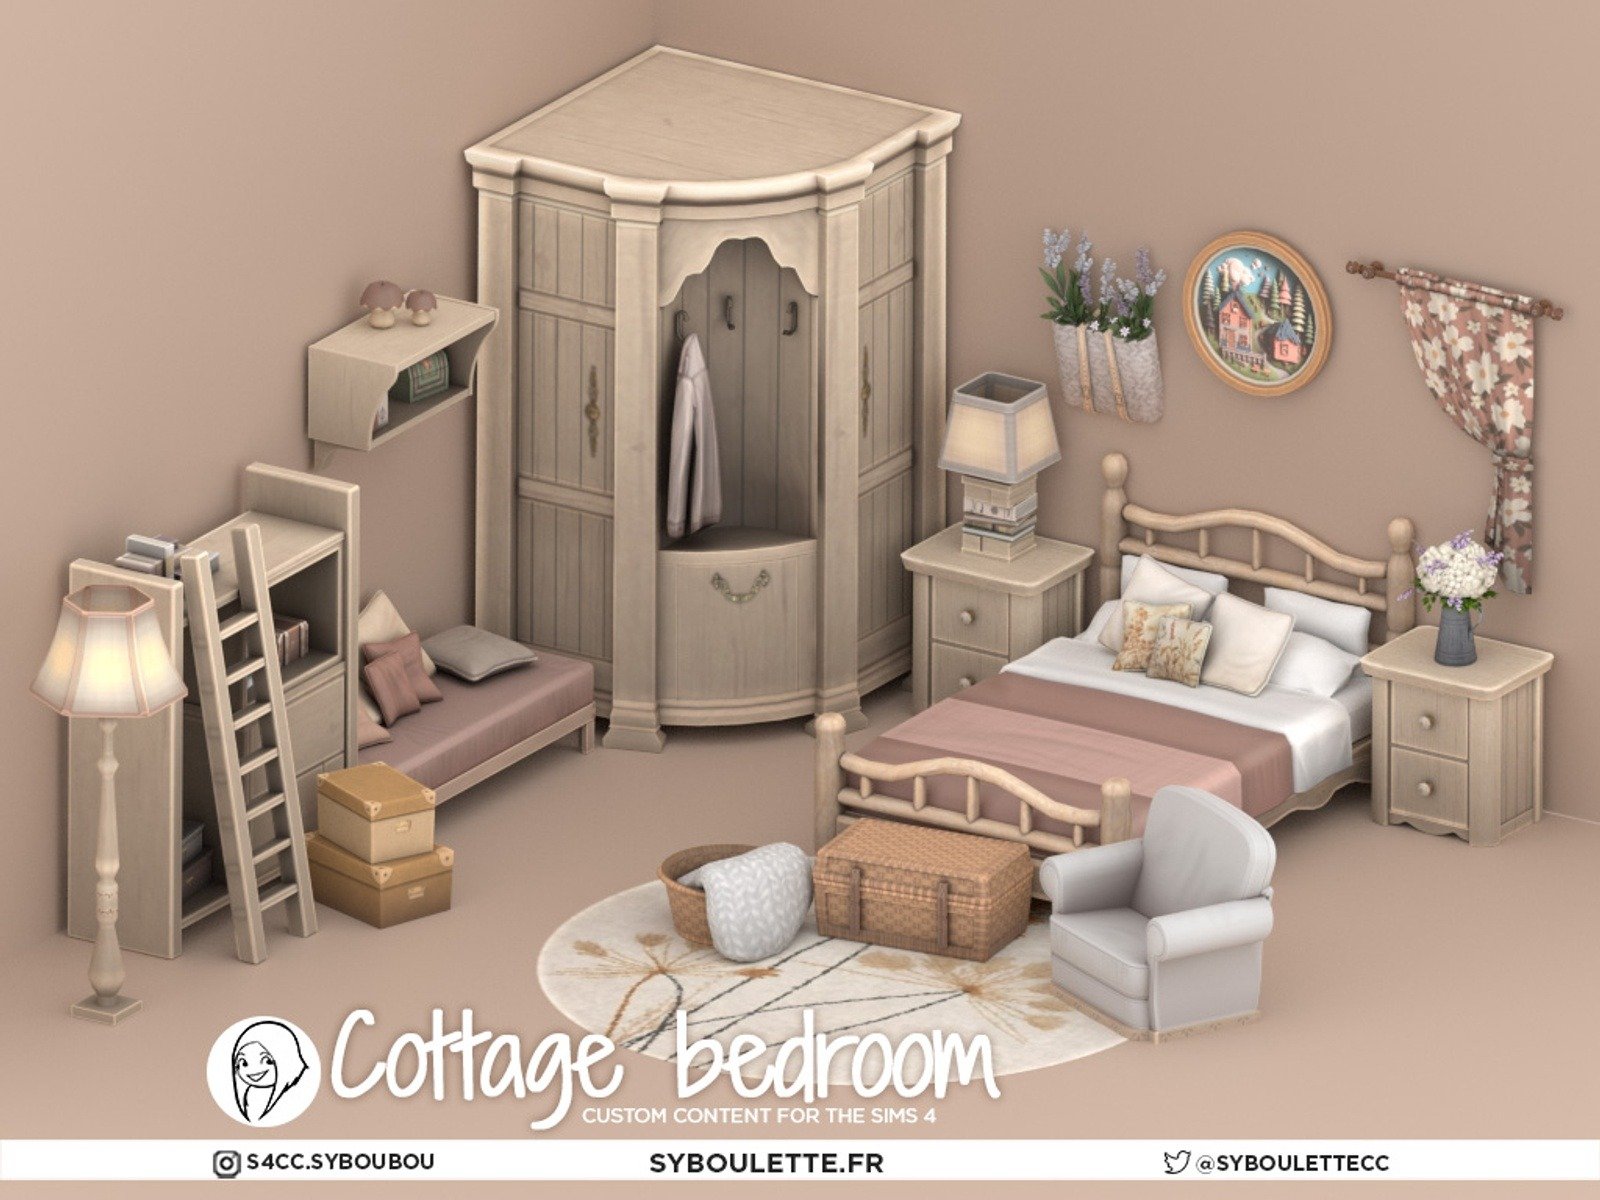 505 cottage bedroom set is available in early access syboulette